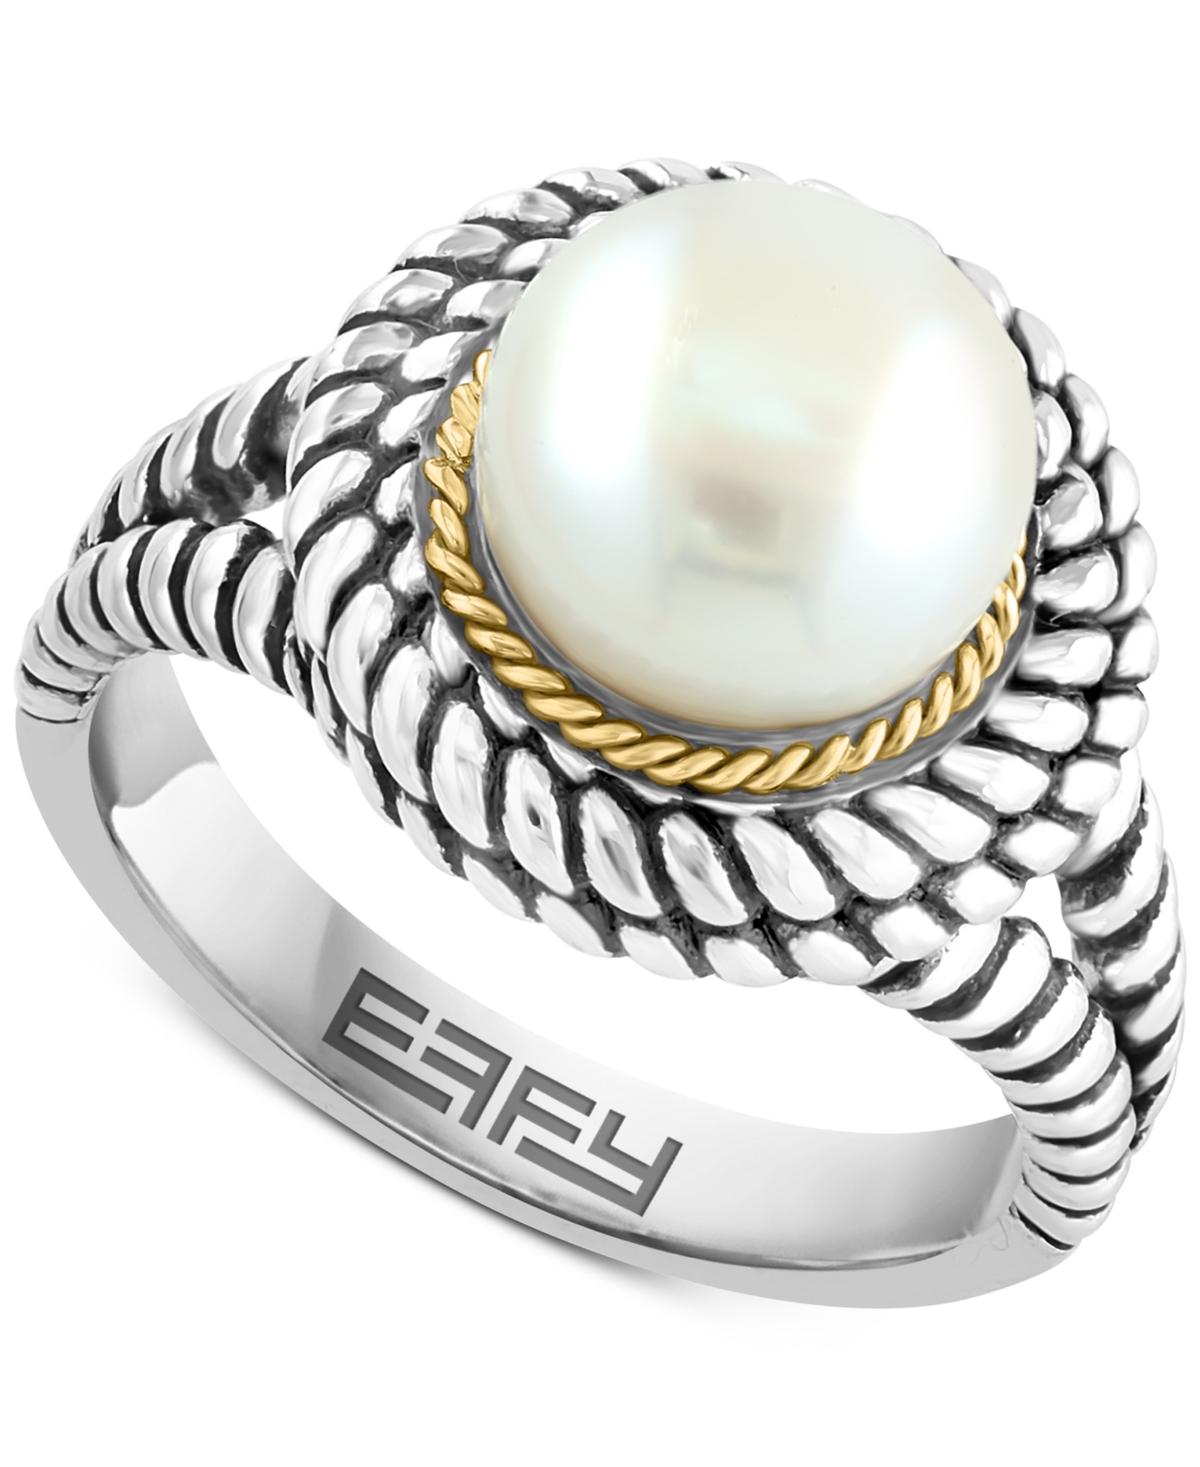 Effy Collection Effy Freshwater Pearl (9mm) Statement Ring In Sterling Silver & 18k Gold-plate In K Gold Over Sterling Silver